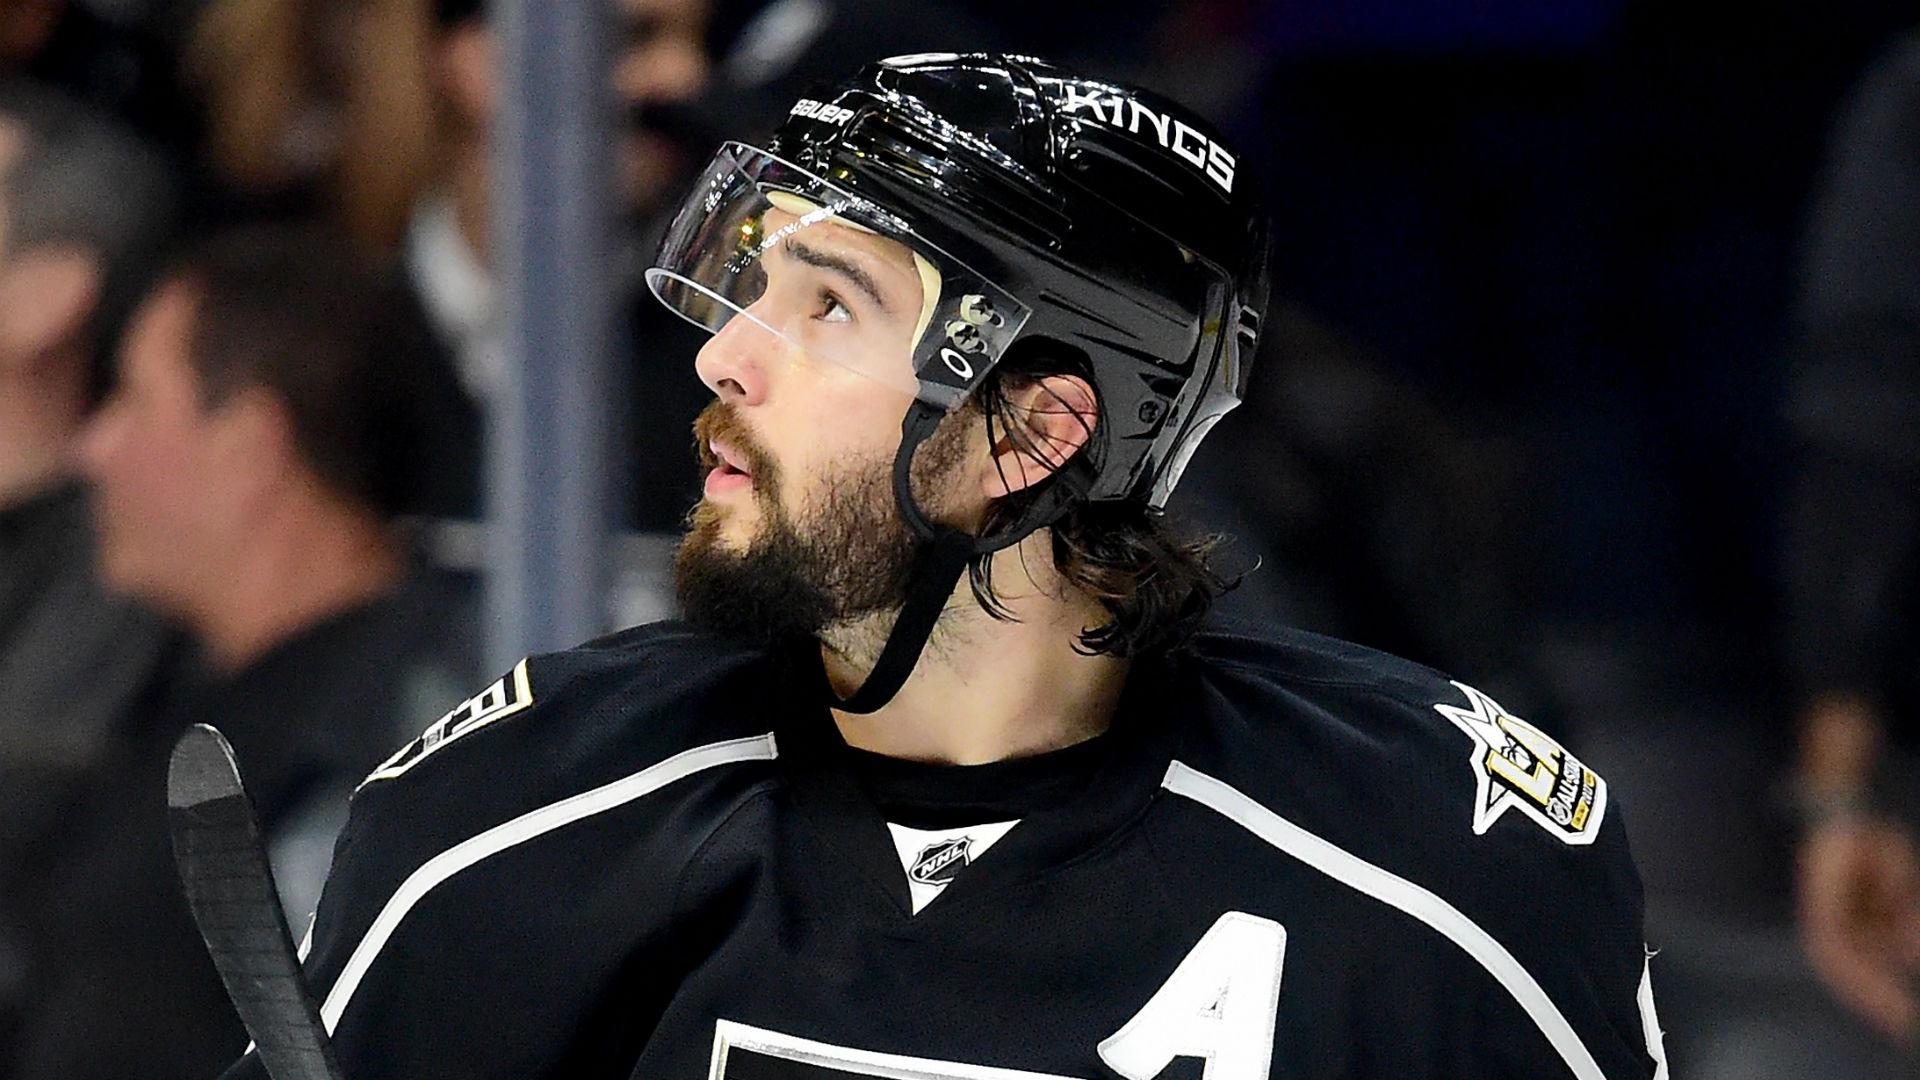 NHL playoffs 2018: Kings' Drew Doughty suspended one game